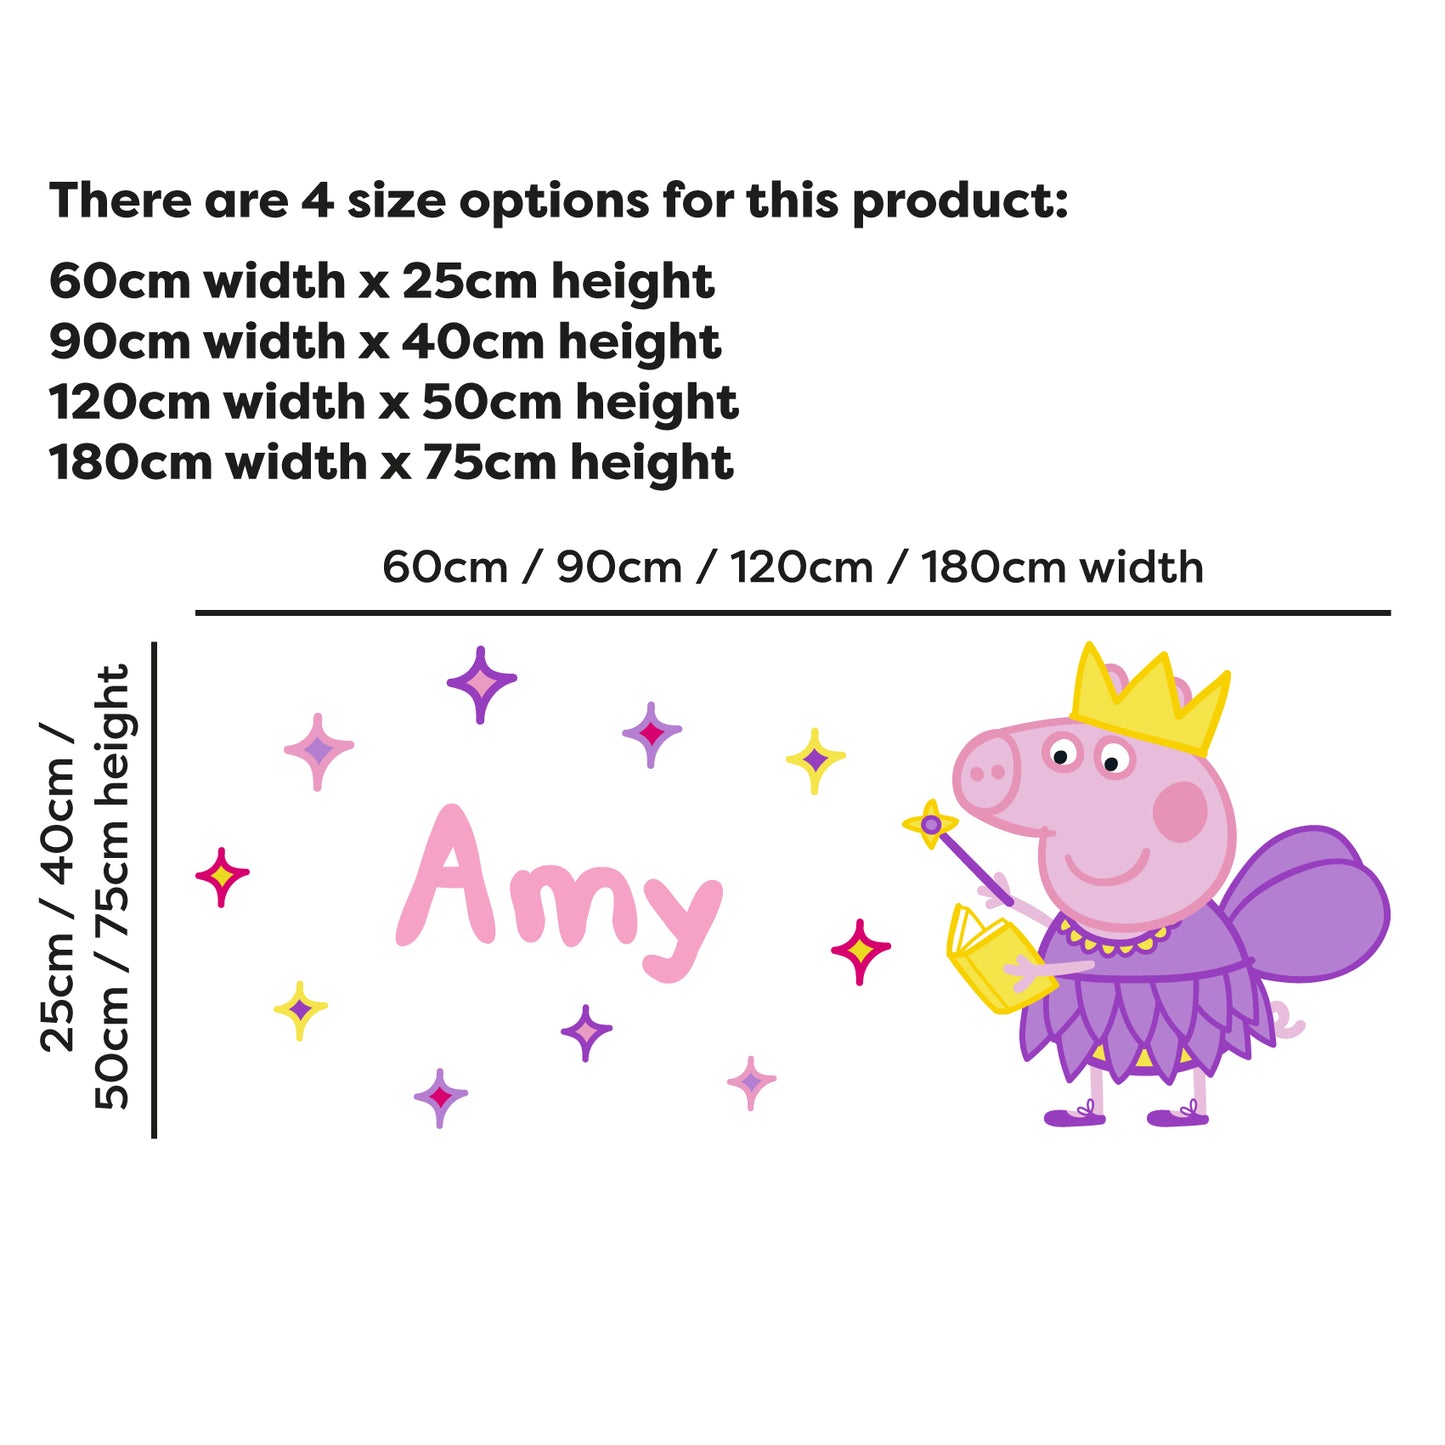 Peppa Pig Wall Sticker - Peppa Pig Fairy Sparkle Personalised Name Wall Decal Kids Art